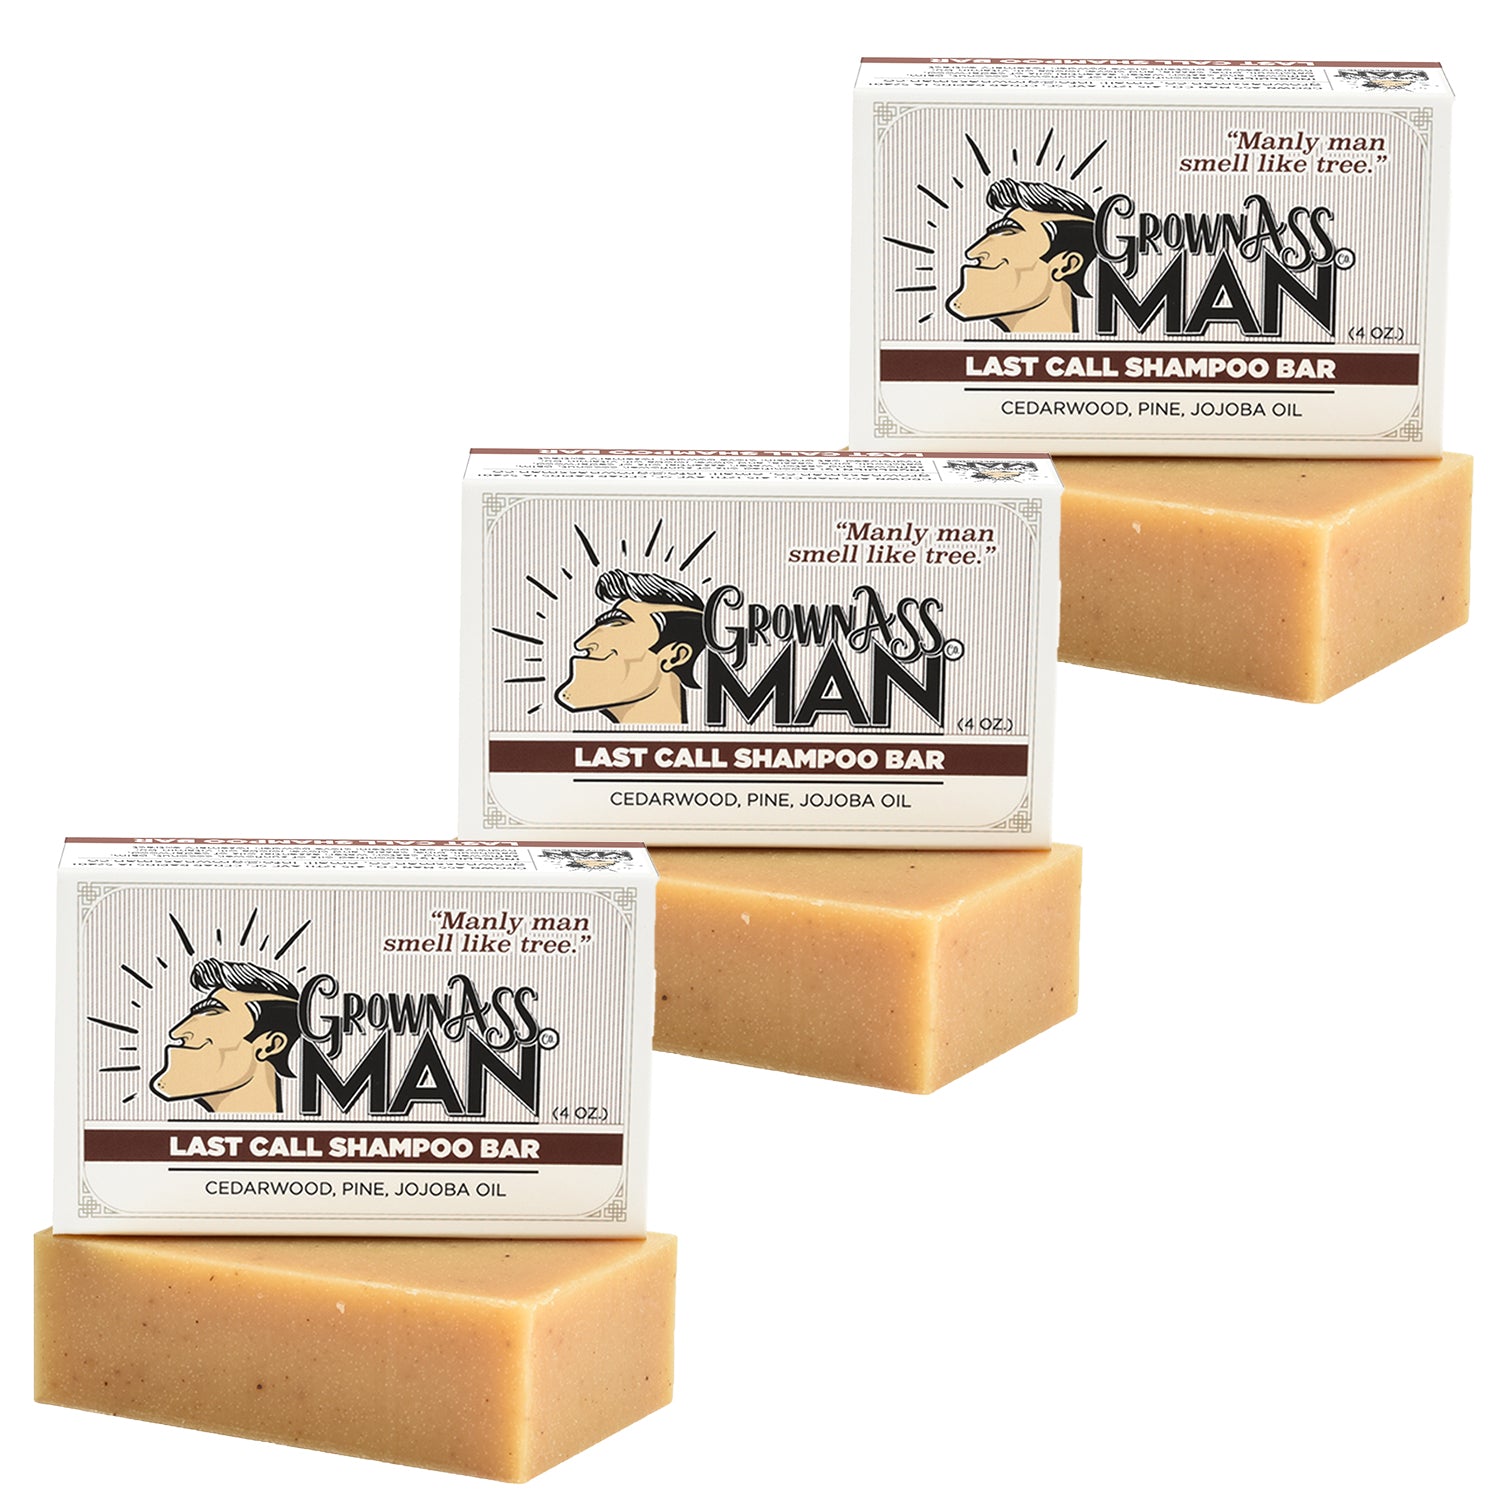 Soap for A Man's Man